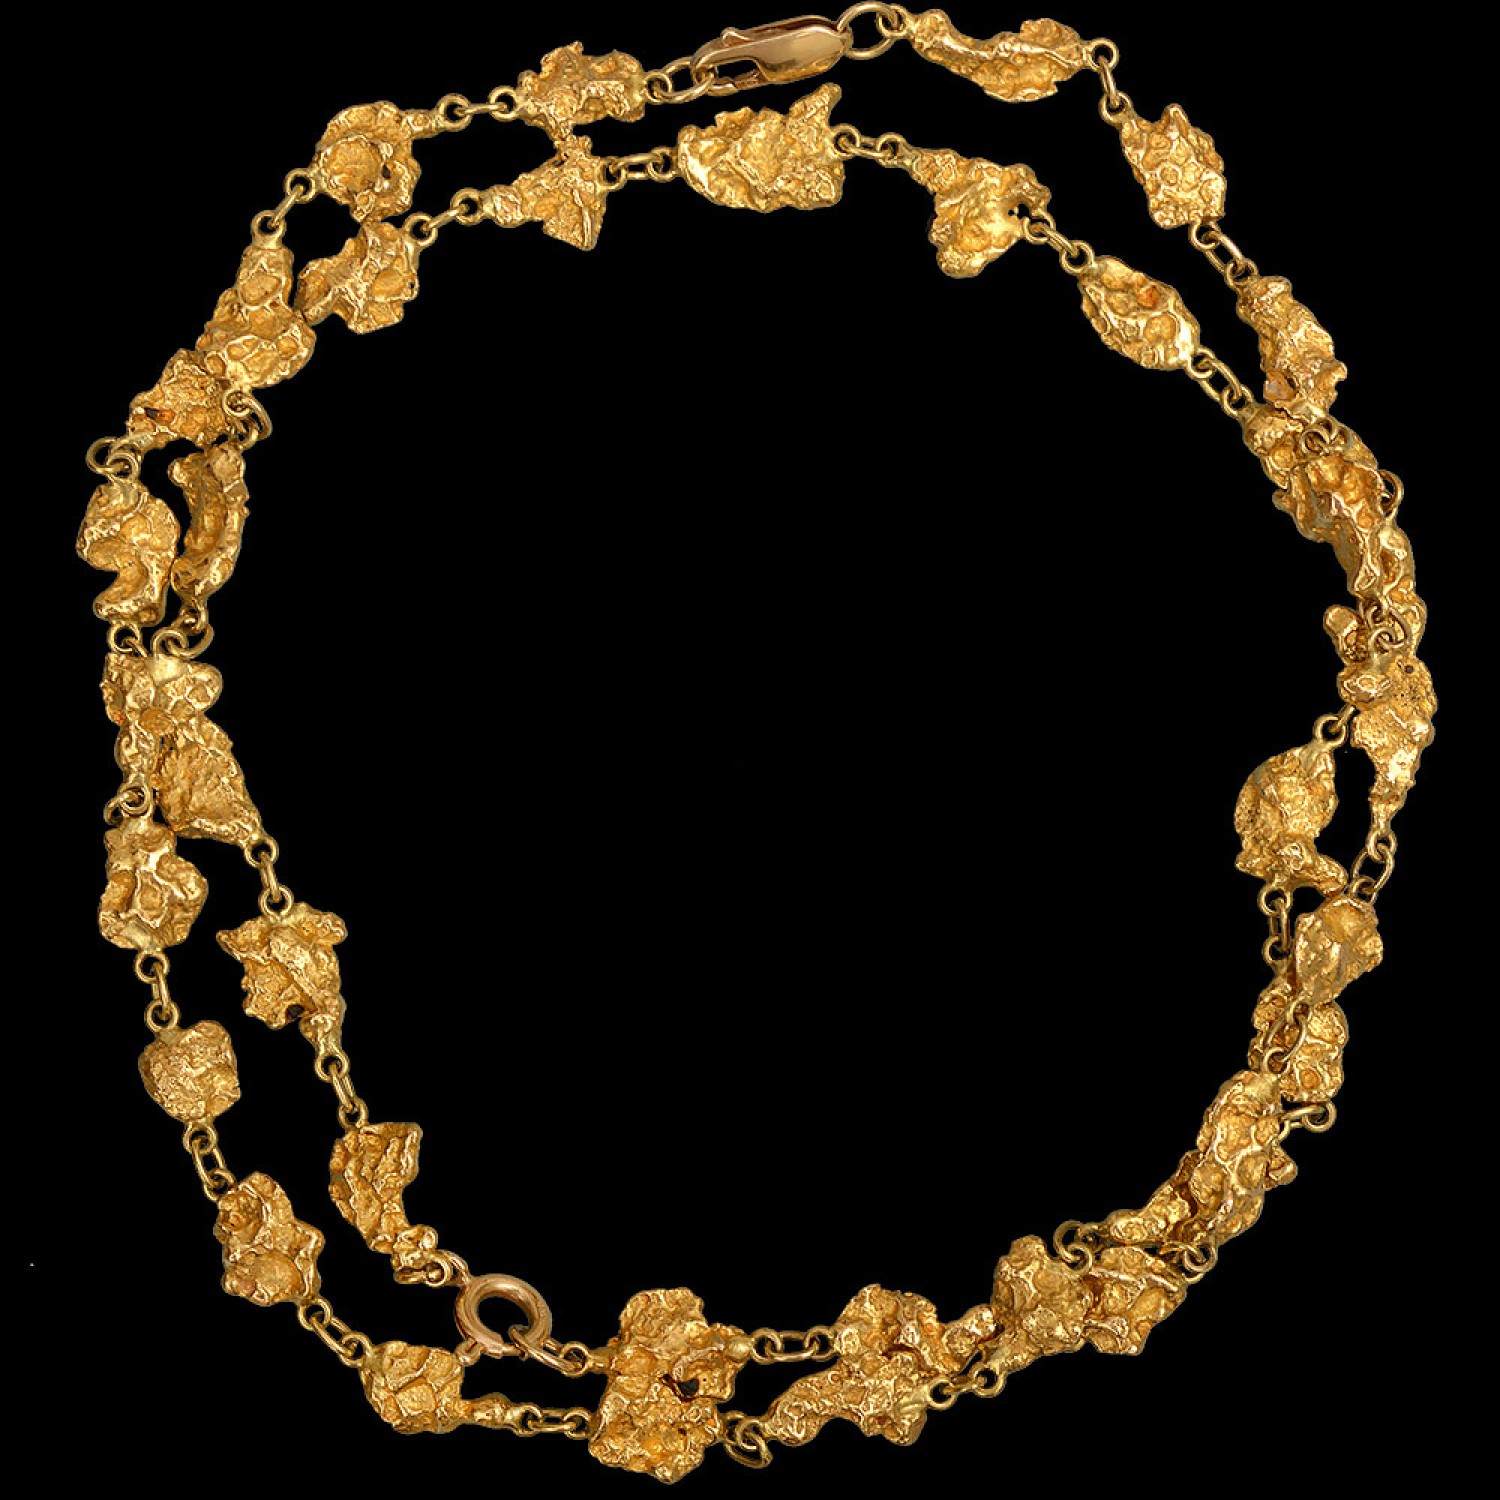 Antique Jewellery » Gold nugget chain with 18ct links, converts into ...